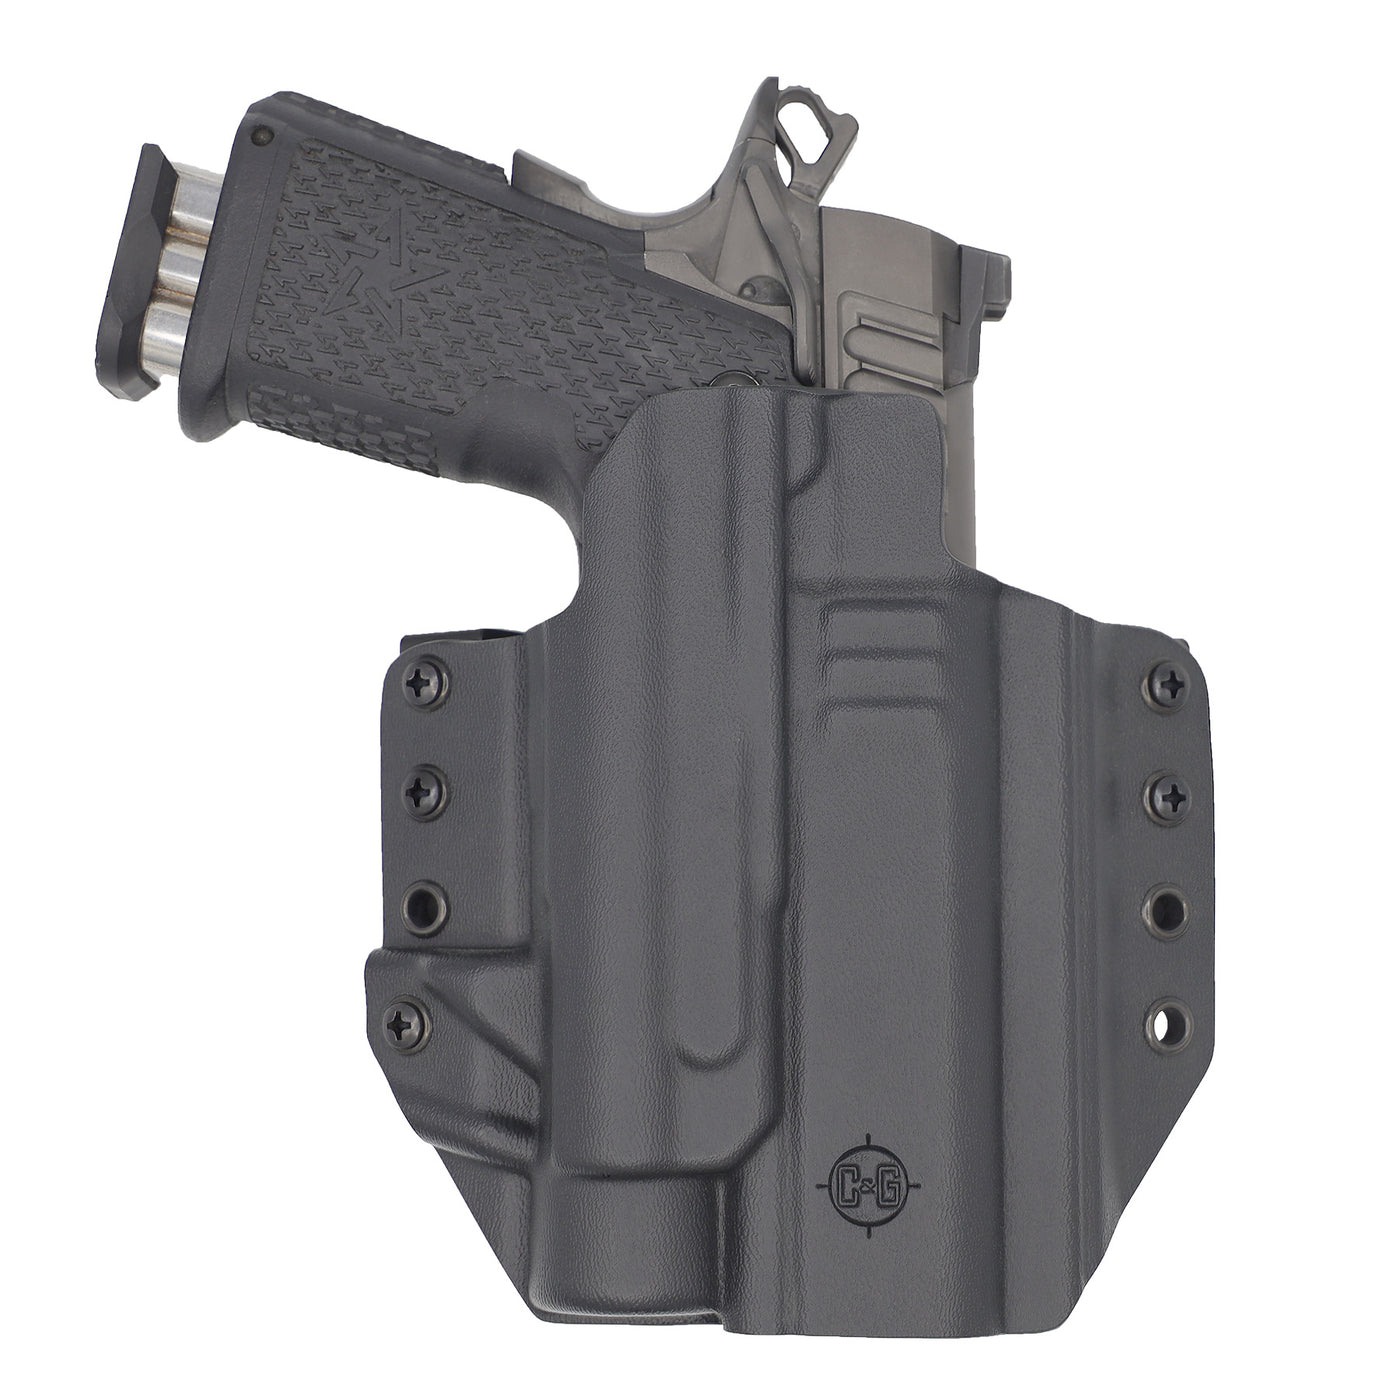 C&G Holsters Custom OWB tactical 1911/2011 Streamlight TLR-1 in holstered position